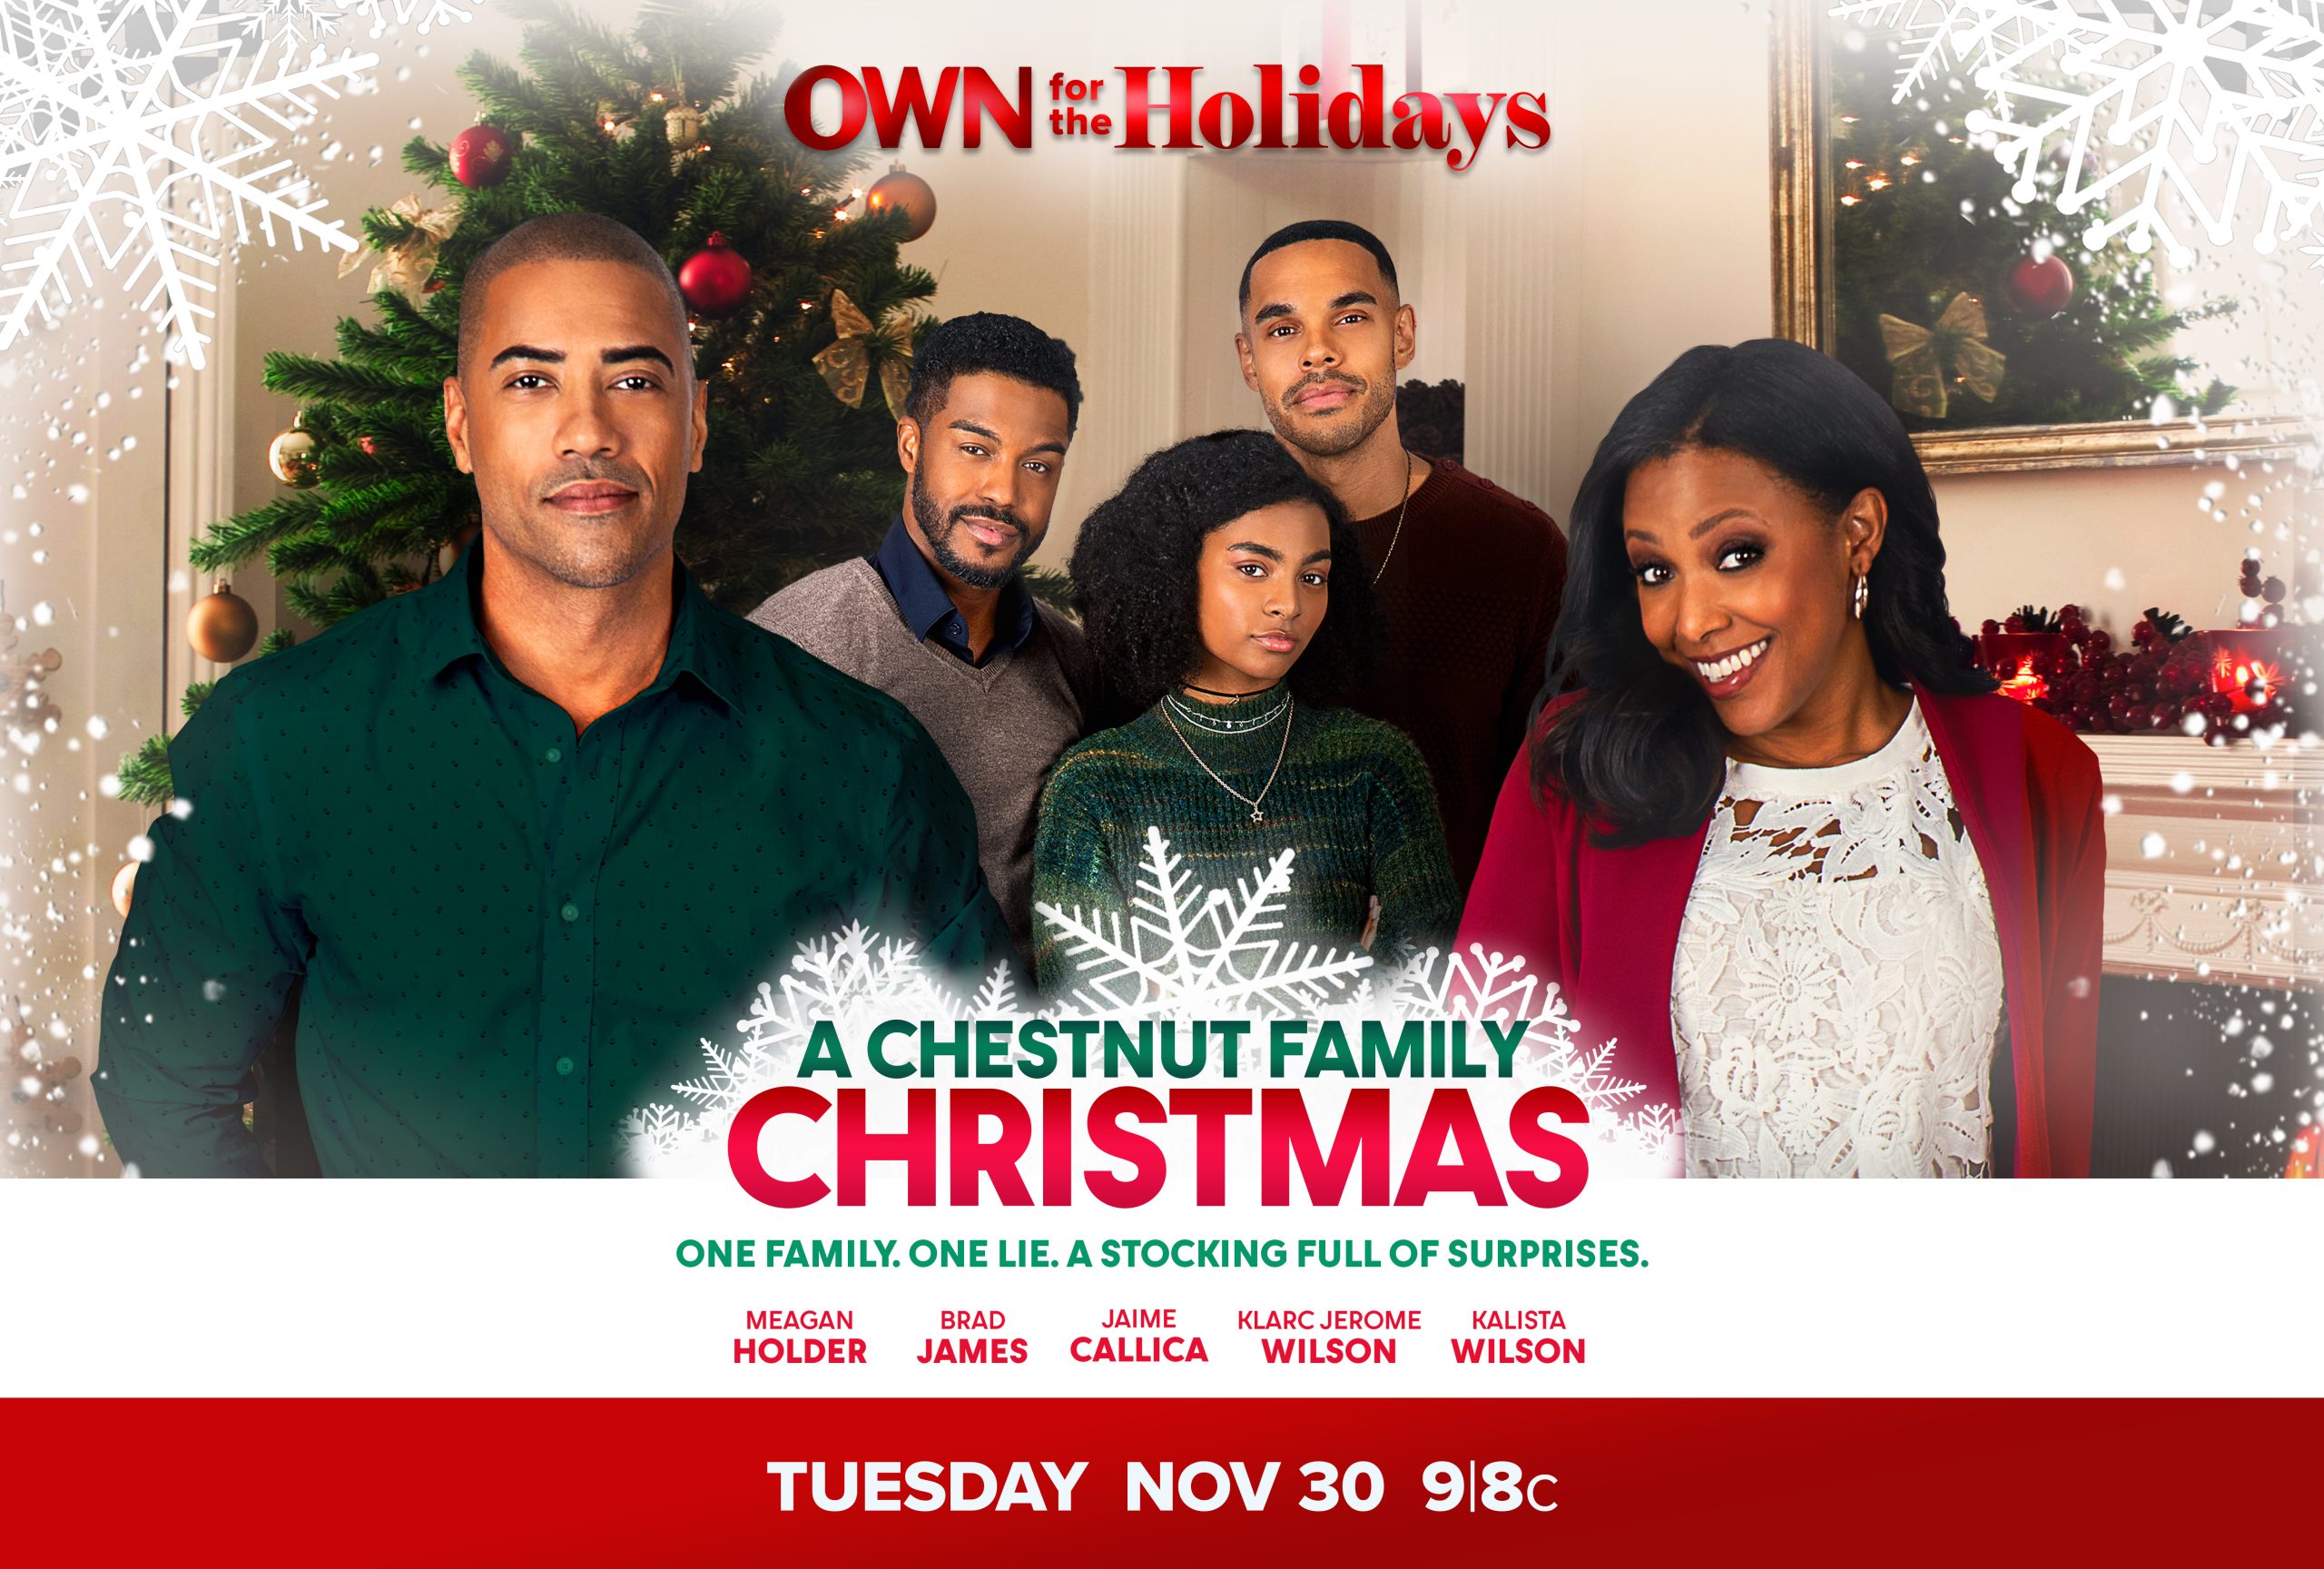 First Look: “A Chestnut Family Christmas”